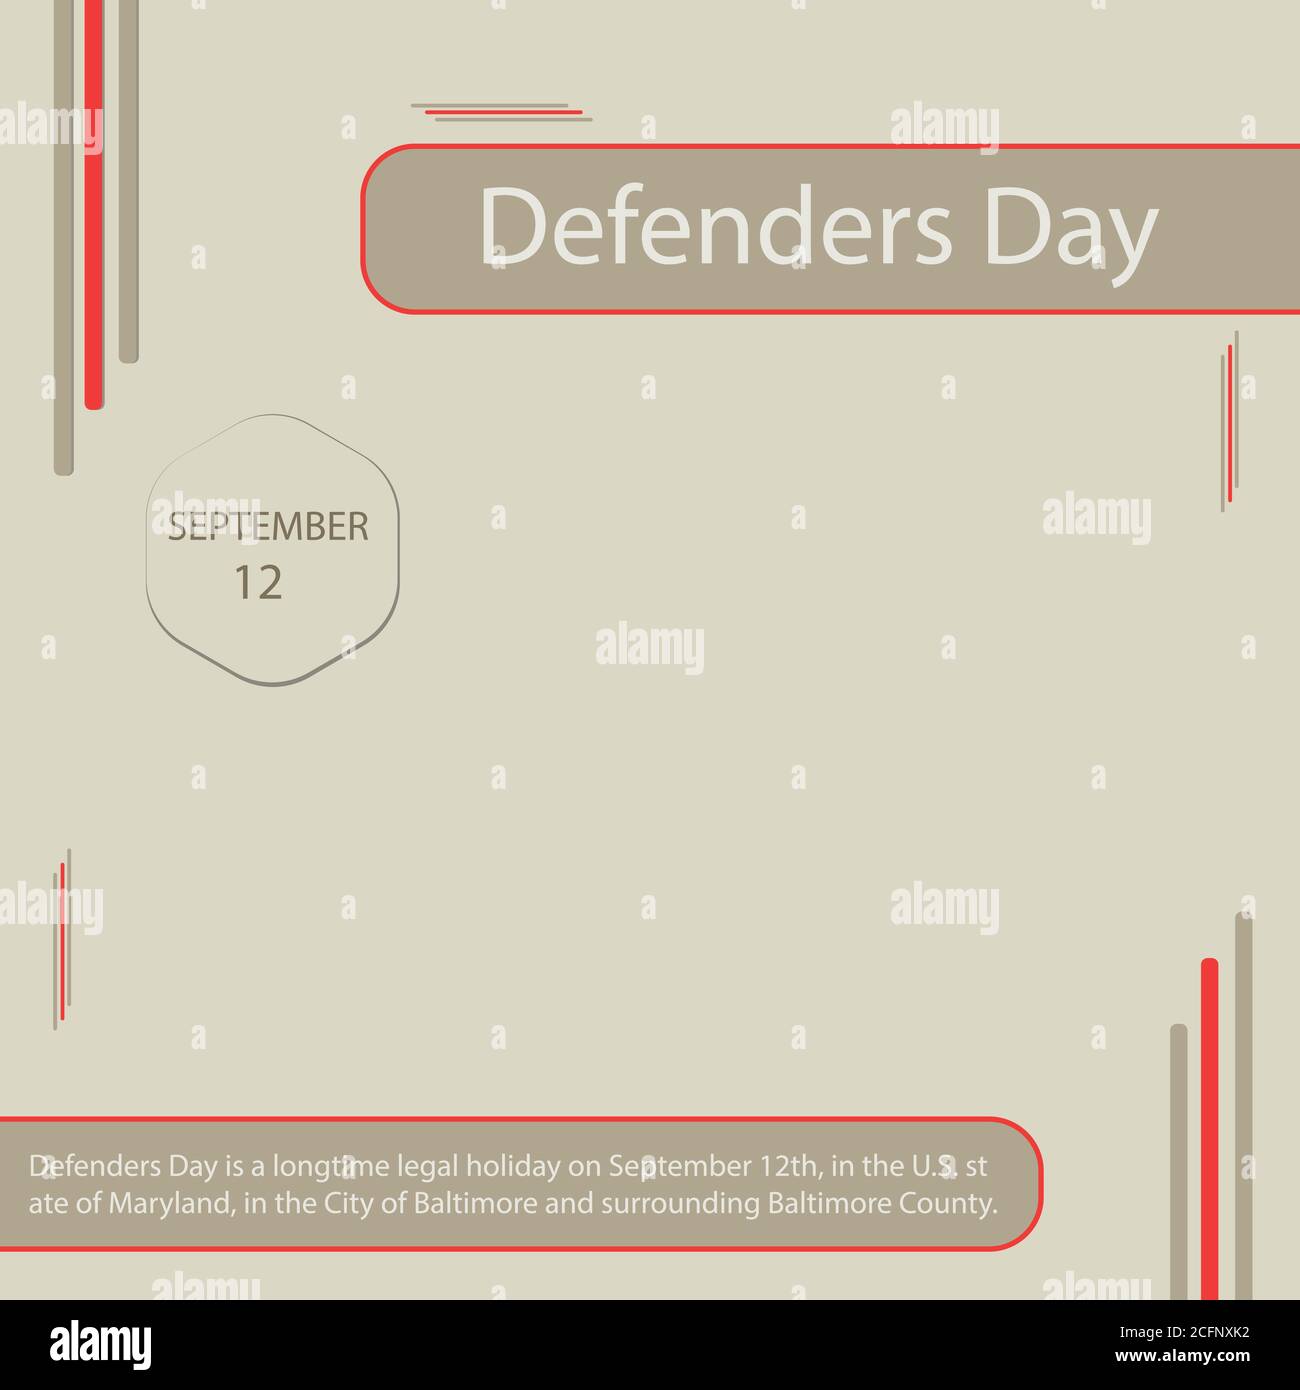 Defenders Day is a longtime legal holiday on September 12th, in the U.S. state of Maryland, in the City of Baltimore and surrounding Baltimore County. Stock Vector